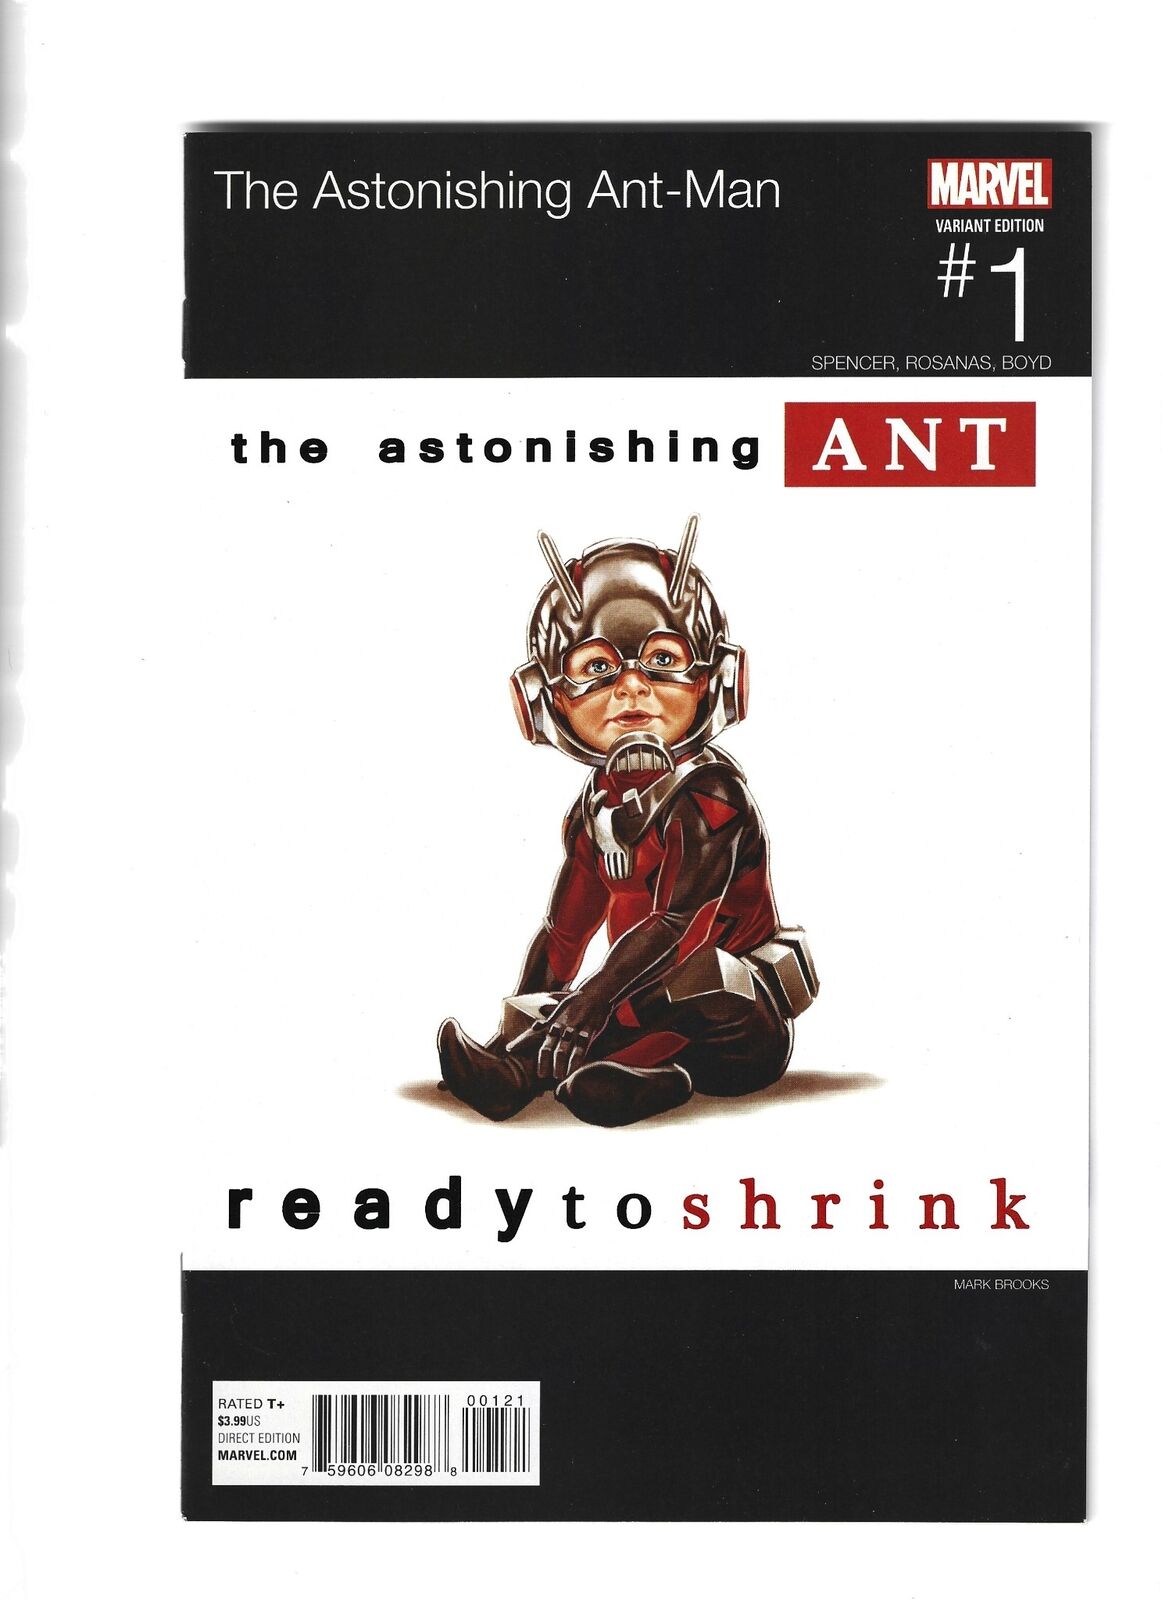 Astonishing Ant-Man #1 (Notorious BIG, Ready to Die Hip Hop Variant) NM (LF005)